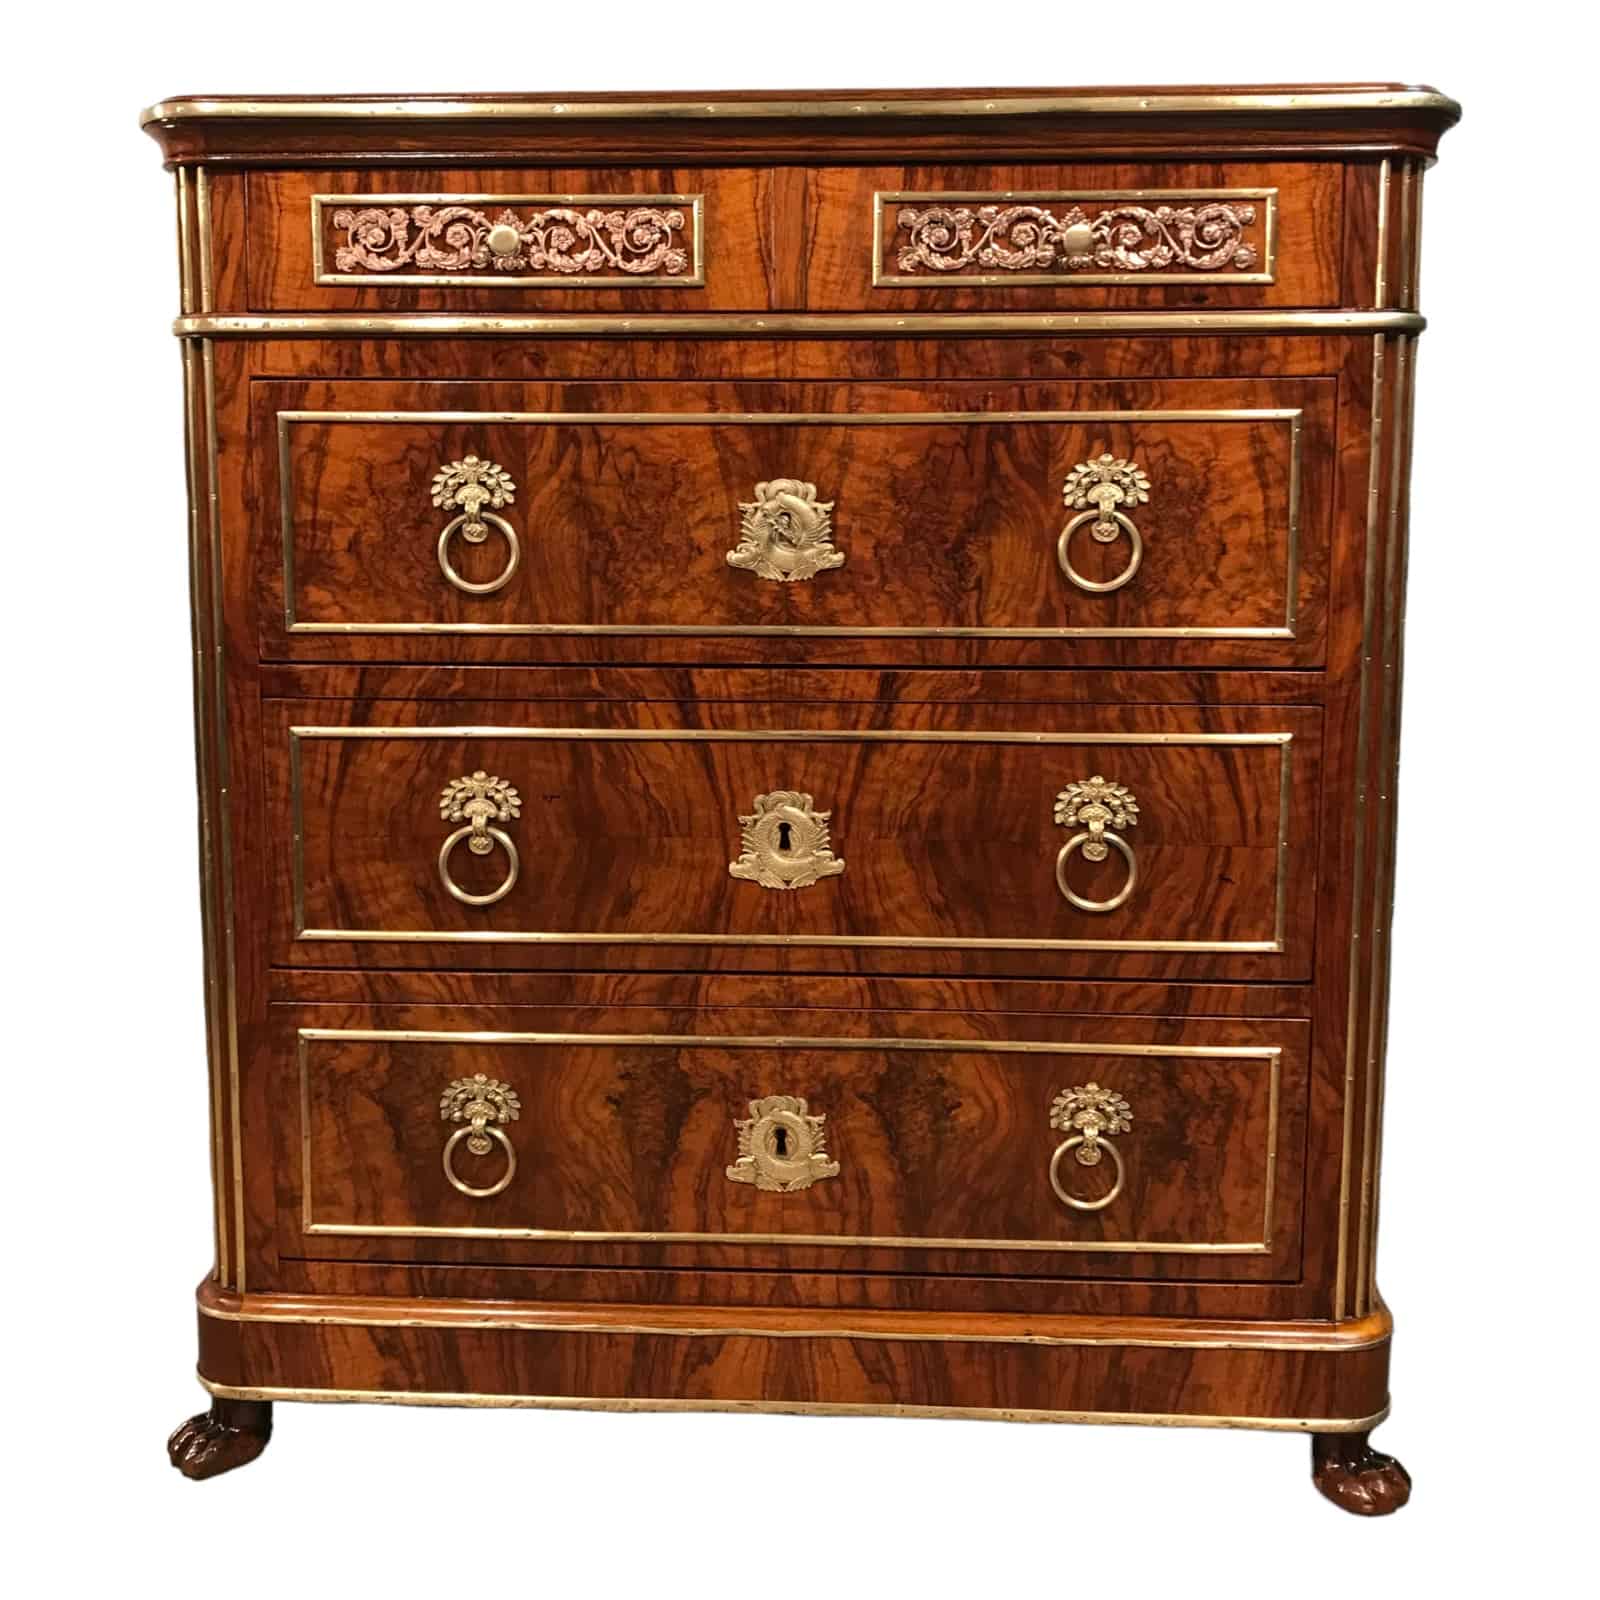 Timeless Practicality: The Highboy Dresser in Any Interior